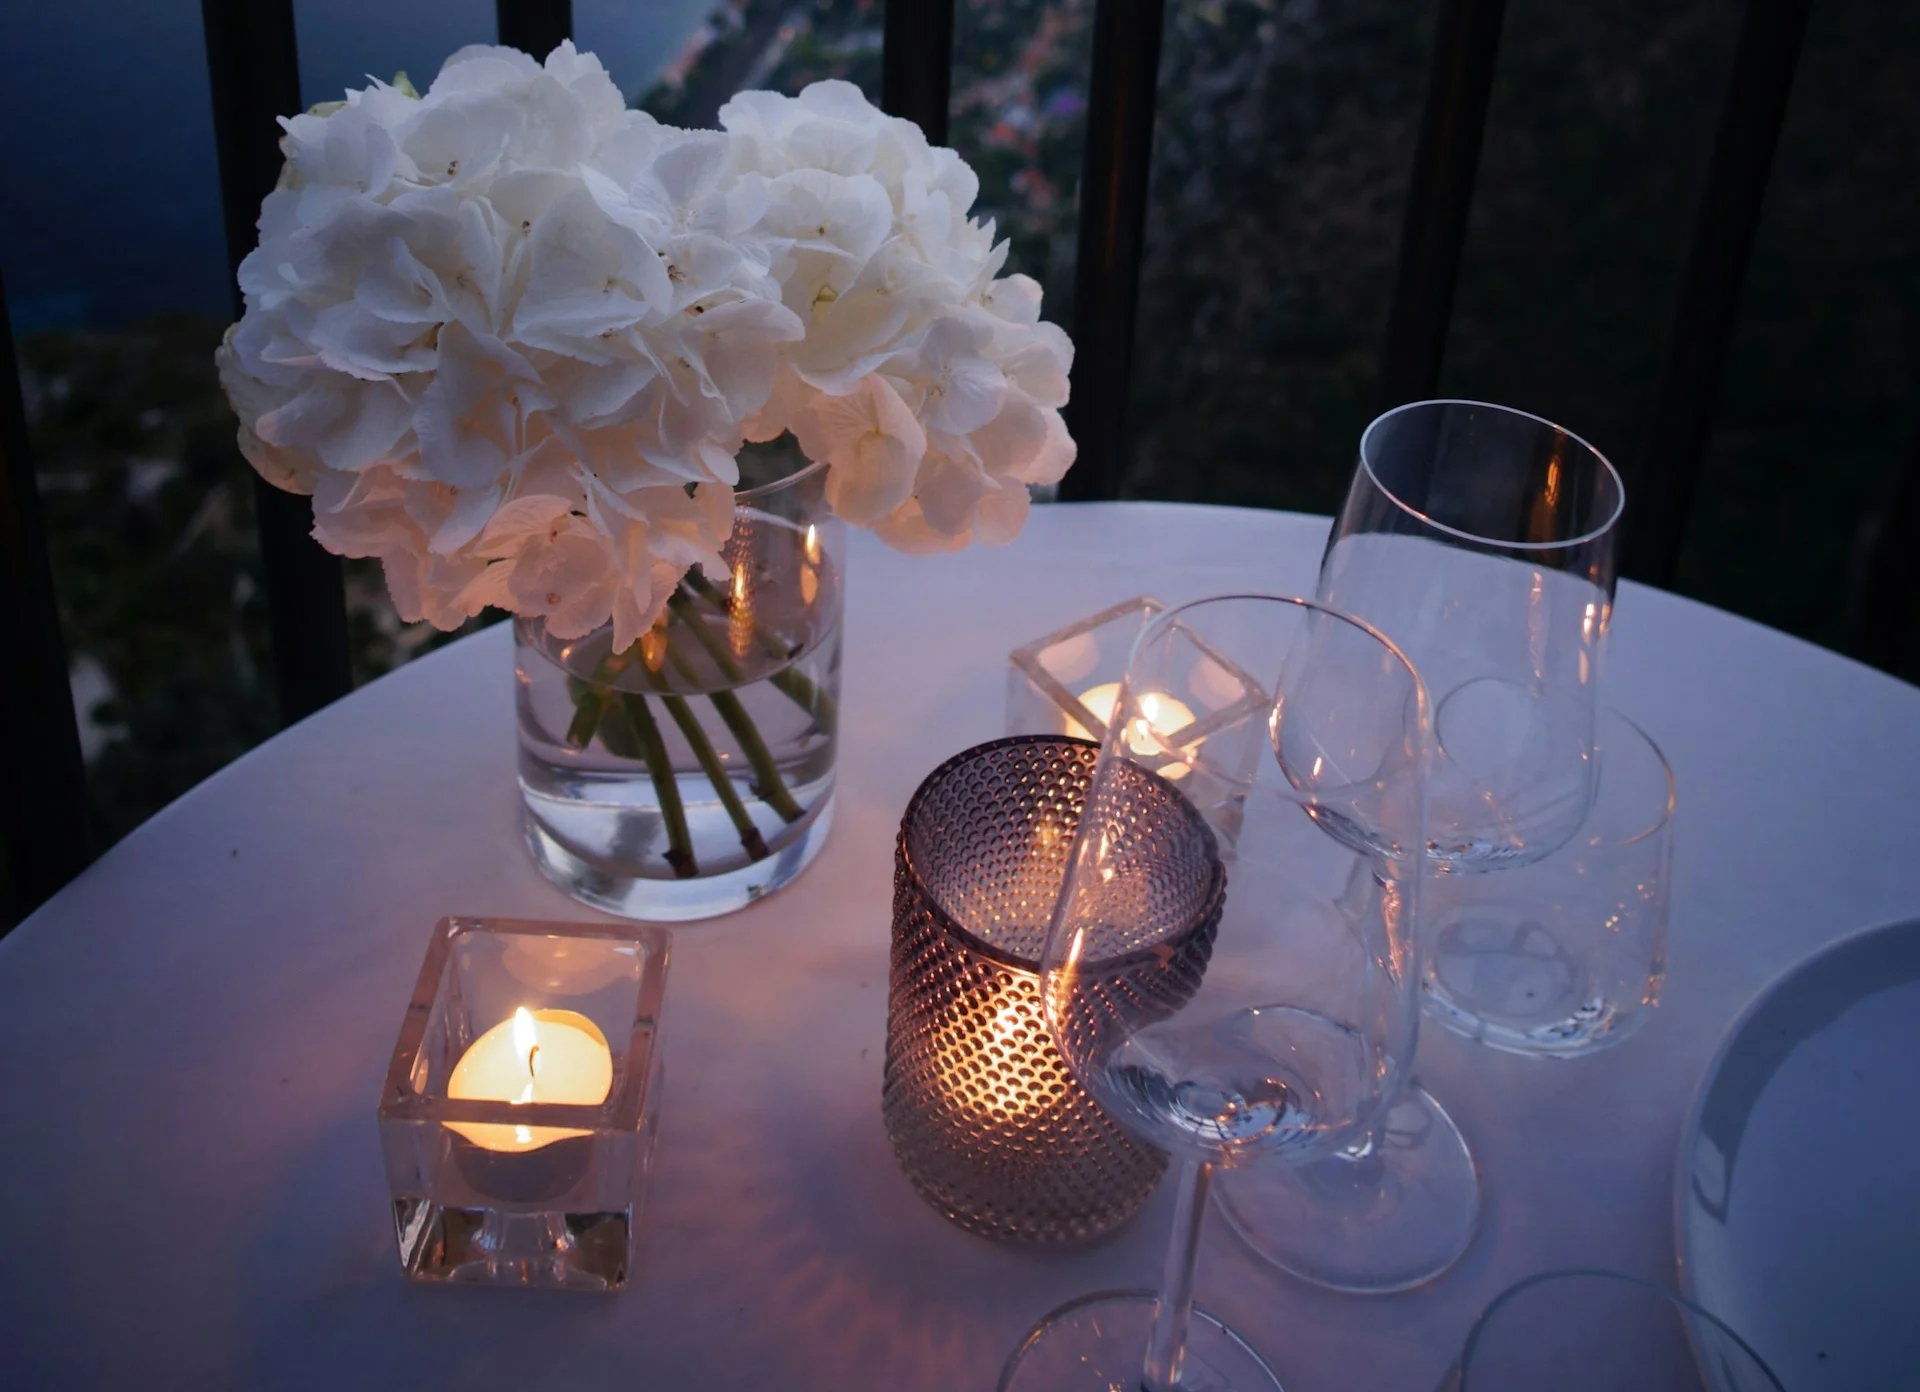 Have Dinner Outside by Candlelight